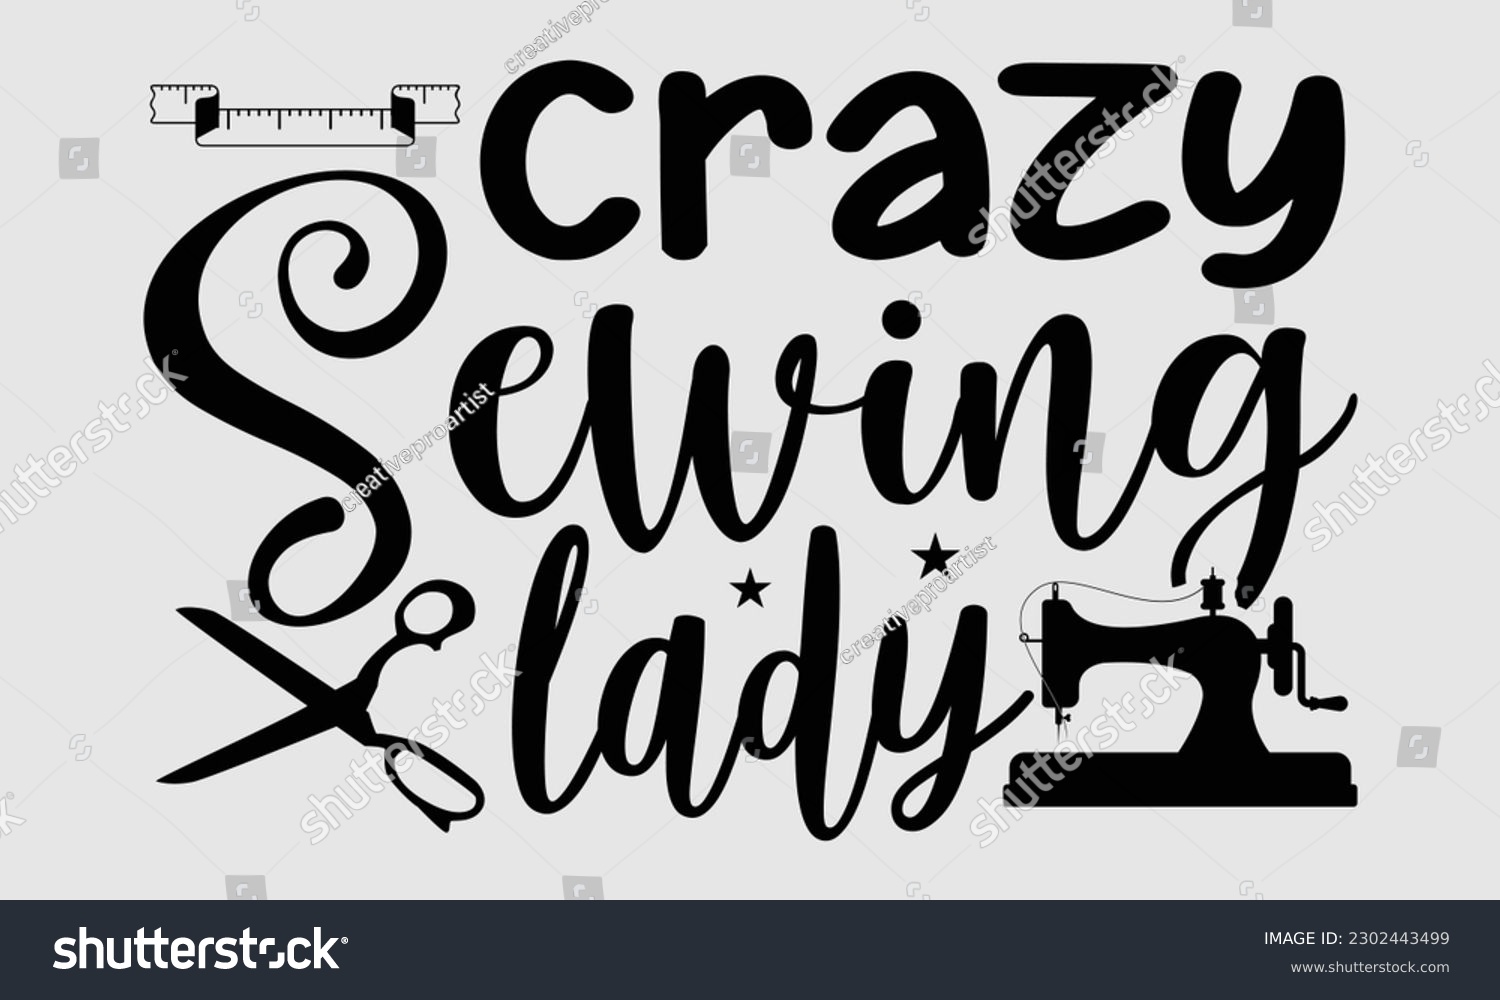 SVG of Crazy sewing lady- Sewing t- shirt design, Hand drawn vintage illustration for prints on eps, svg Files for Cutting, greeting card template with typography text svg